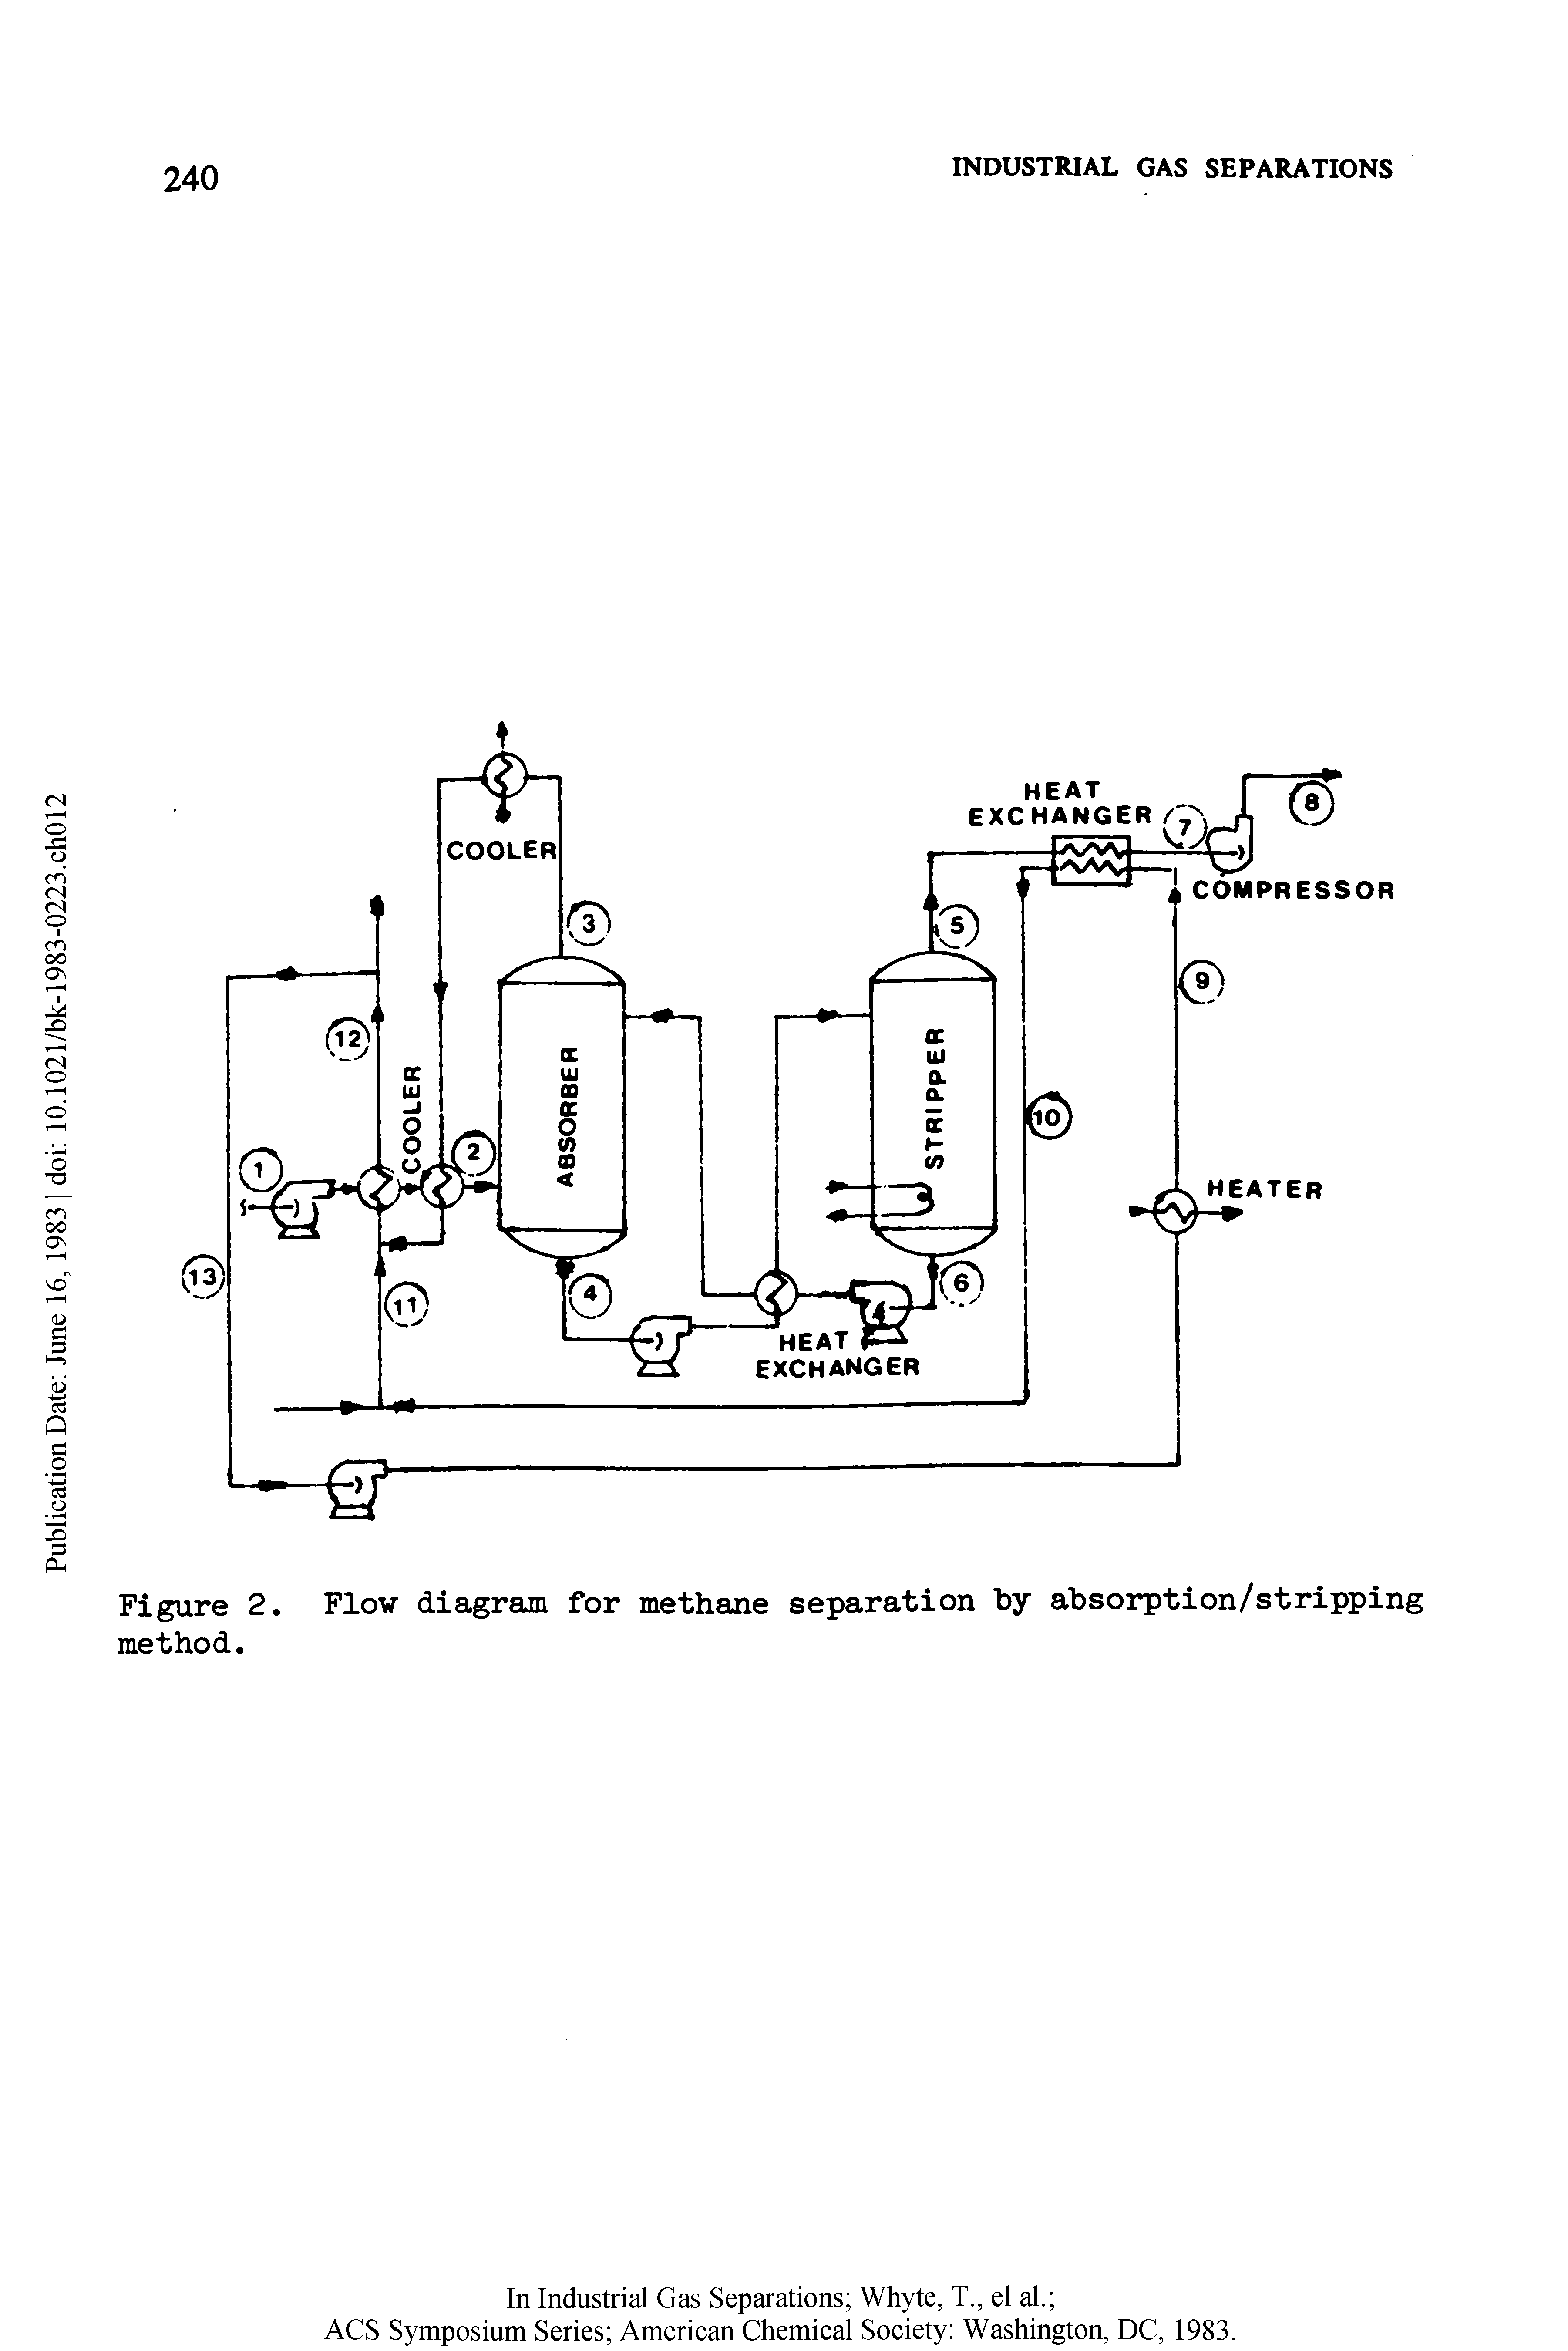 Figure 2. Flow diagram for methane separation by absorption/stripping method.